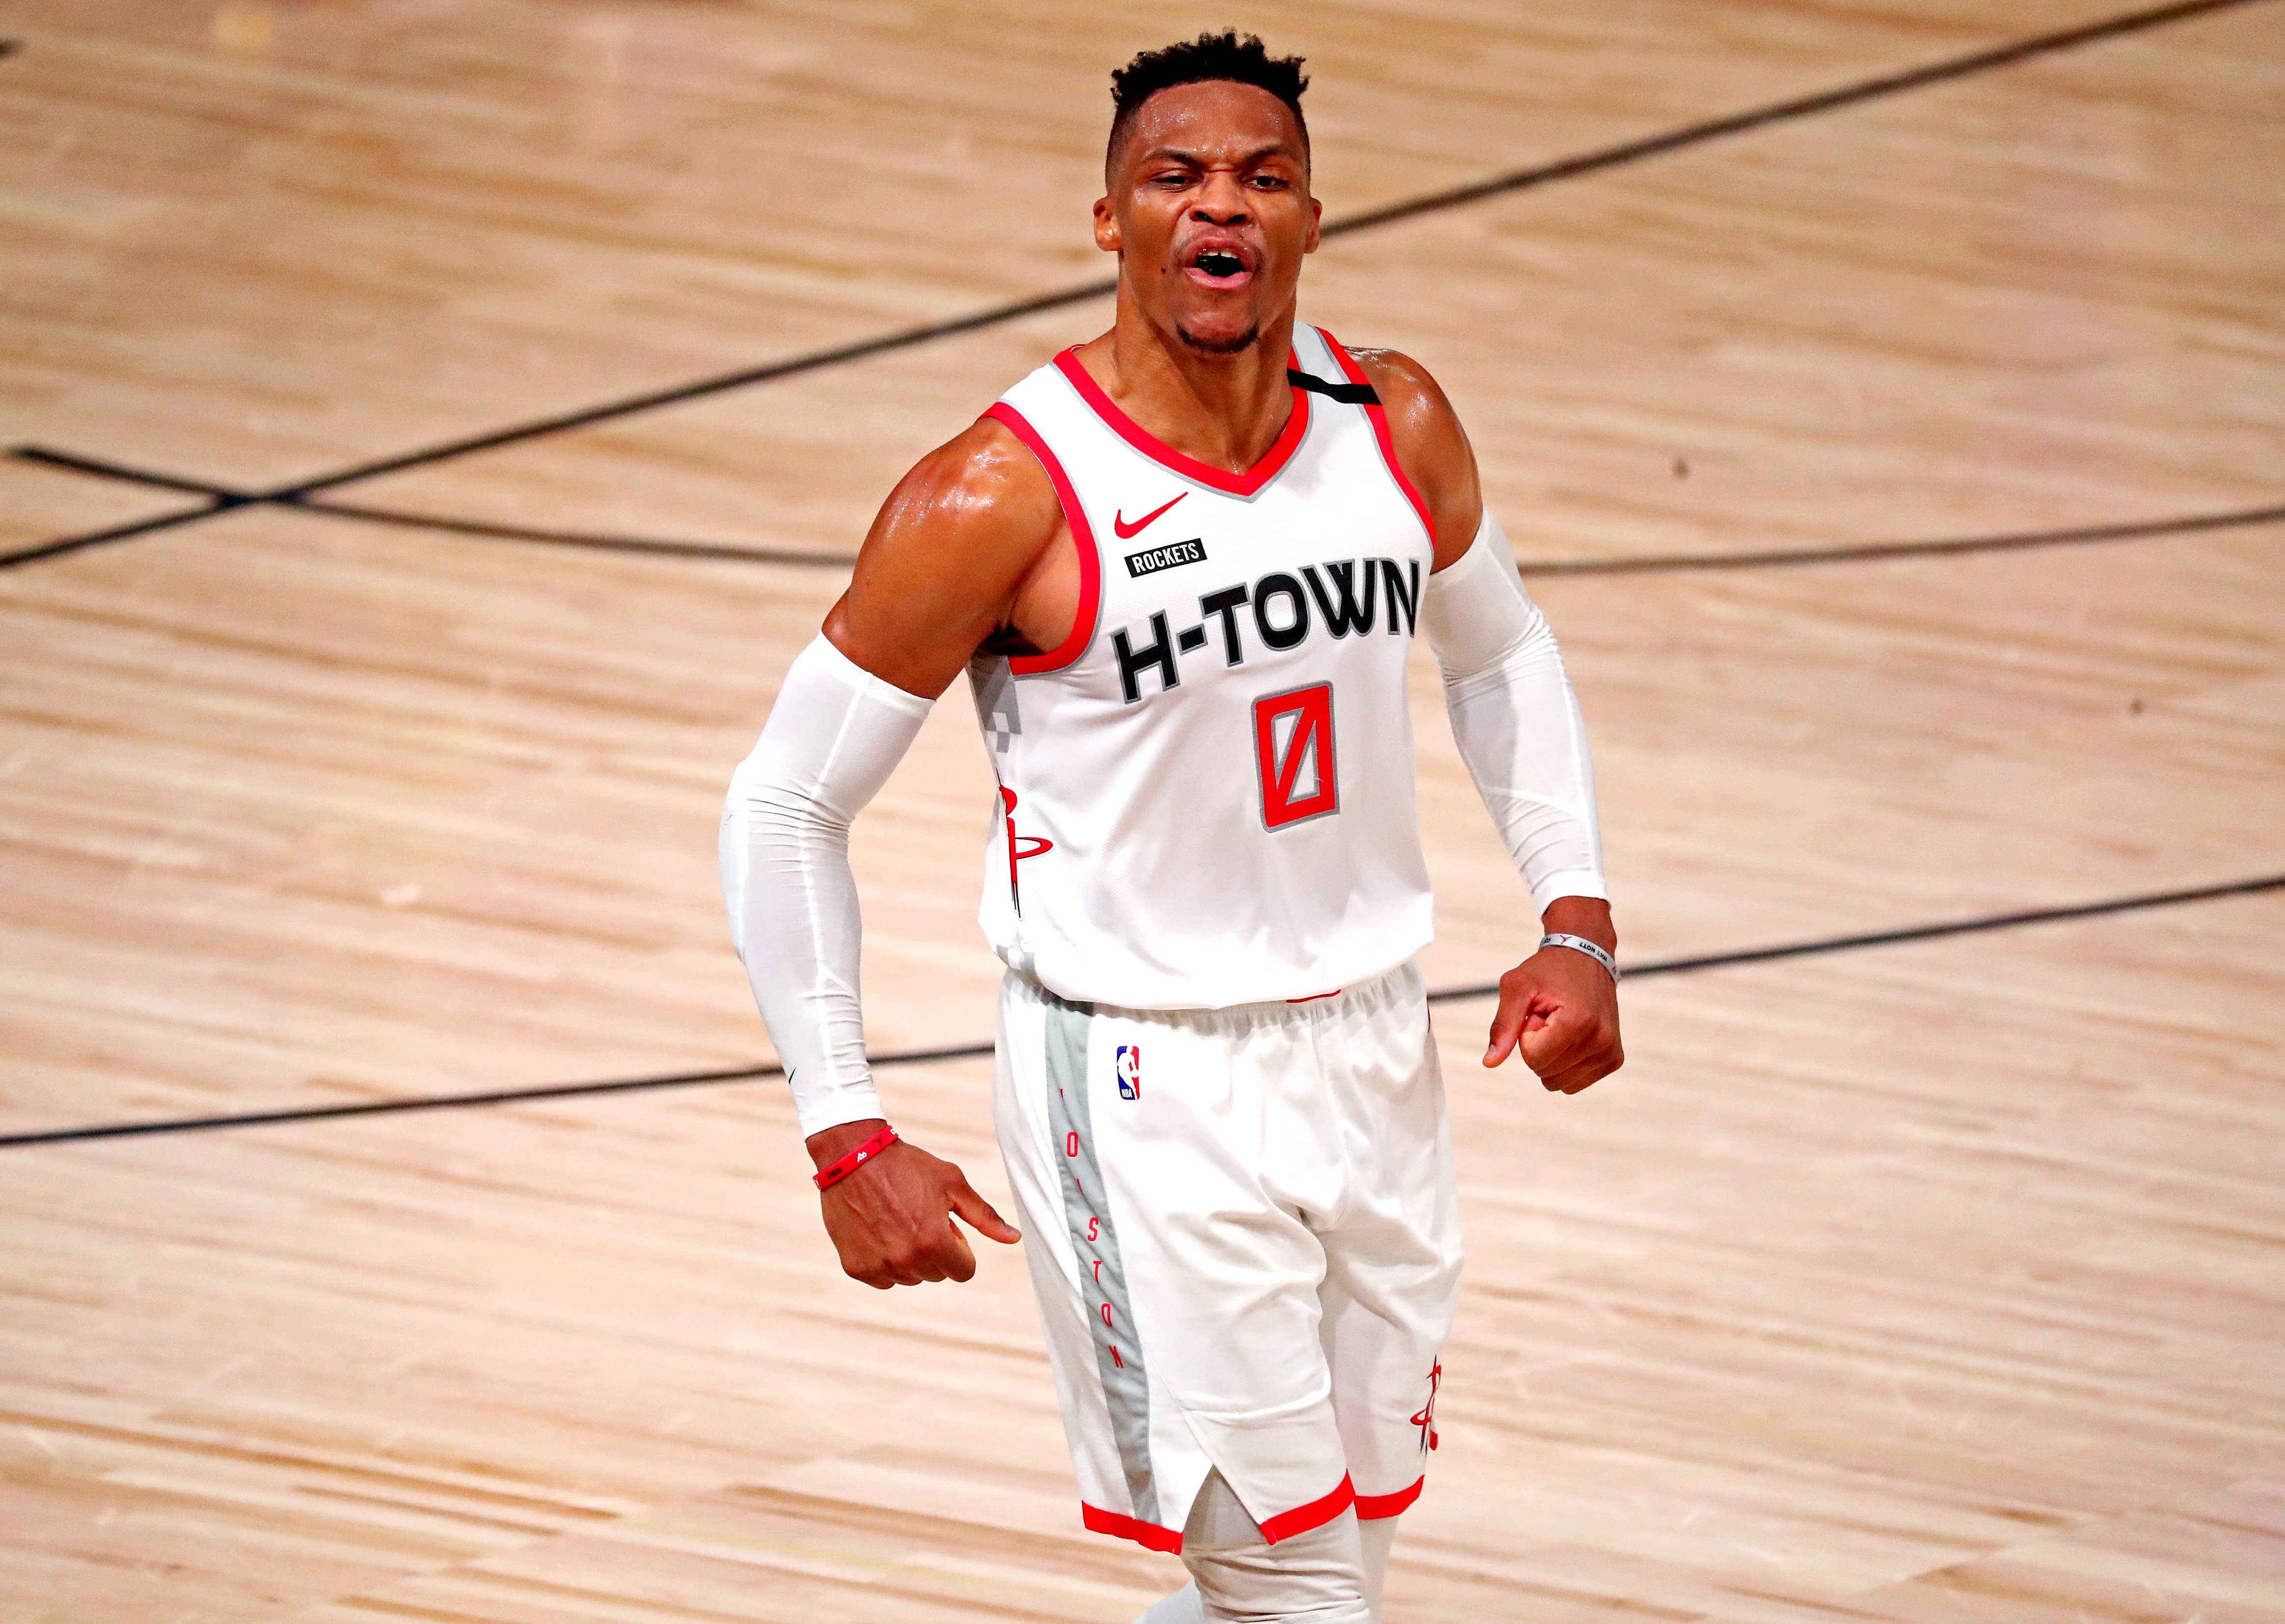 The Best Russell Westbrook Trade Options Ahead of Deadline